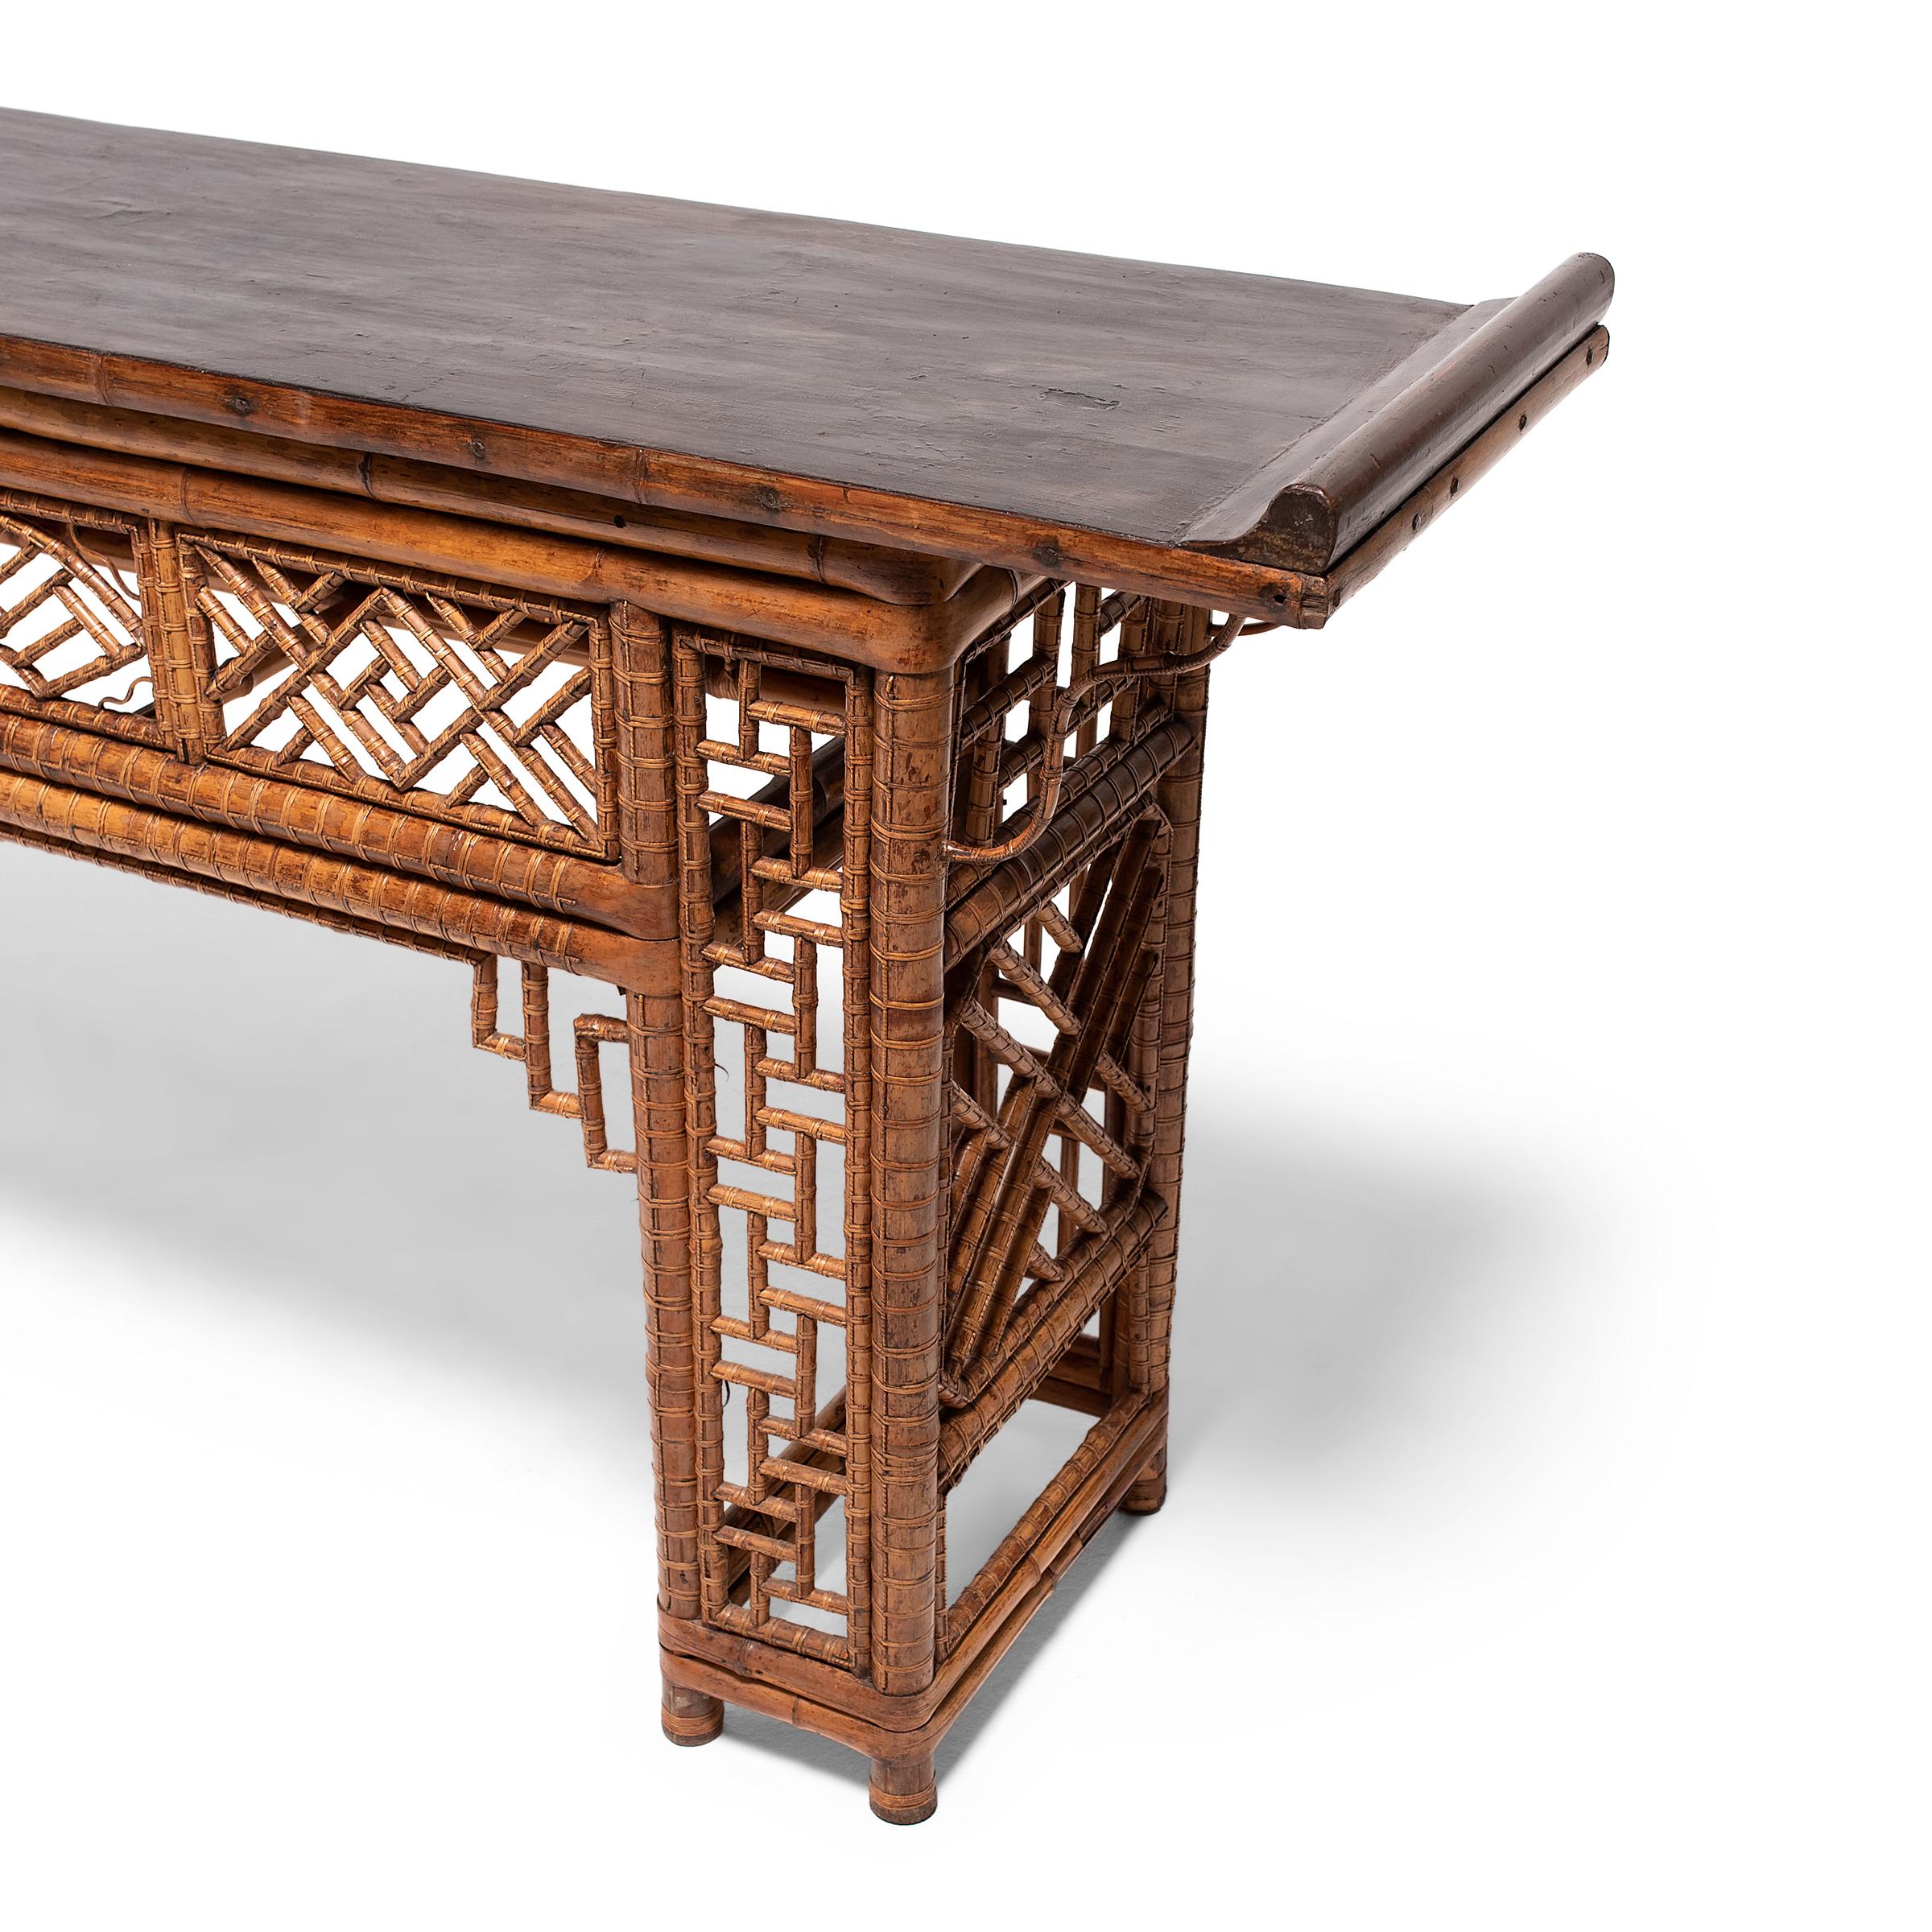 19th Century Chinese Spotted Bamboo Altar Table, C. 1850